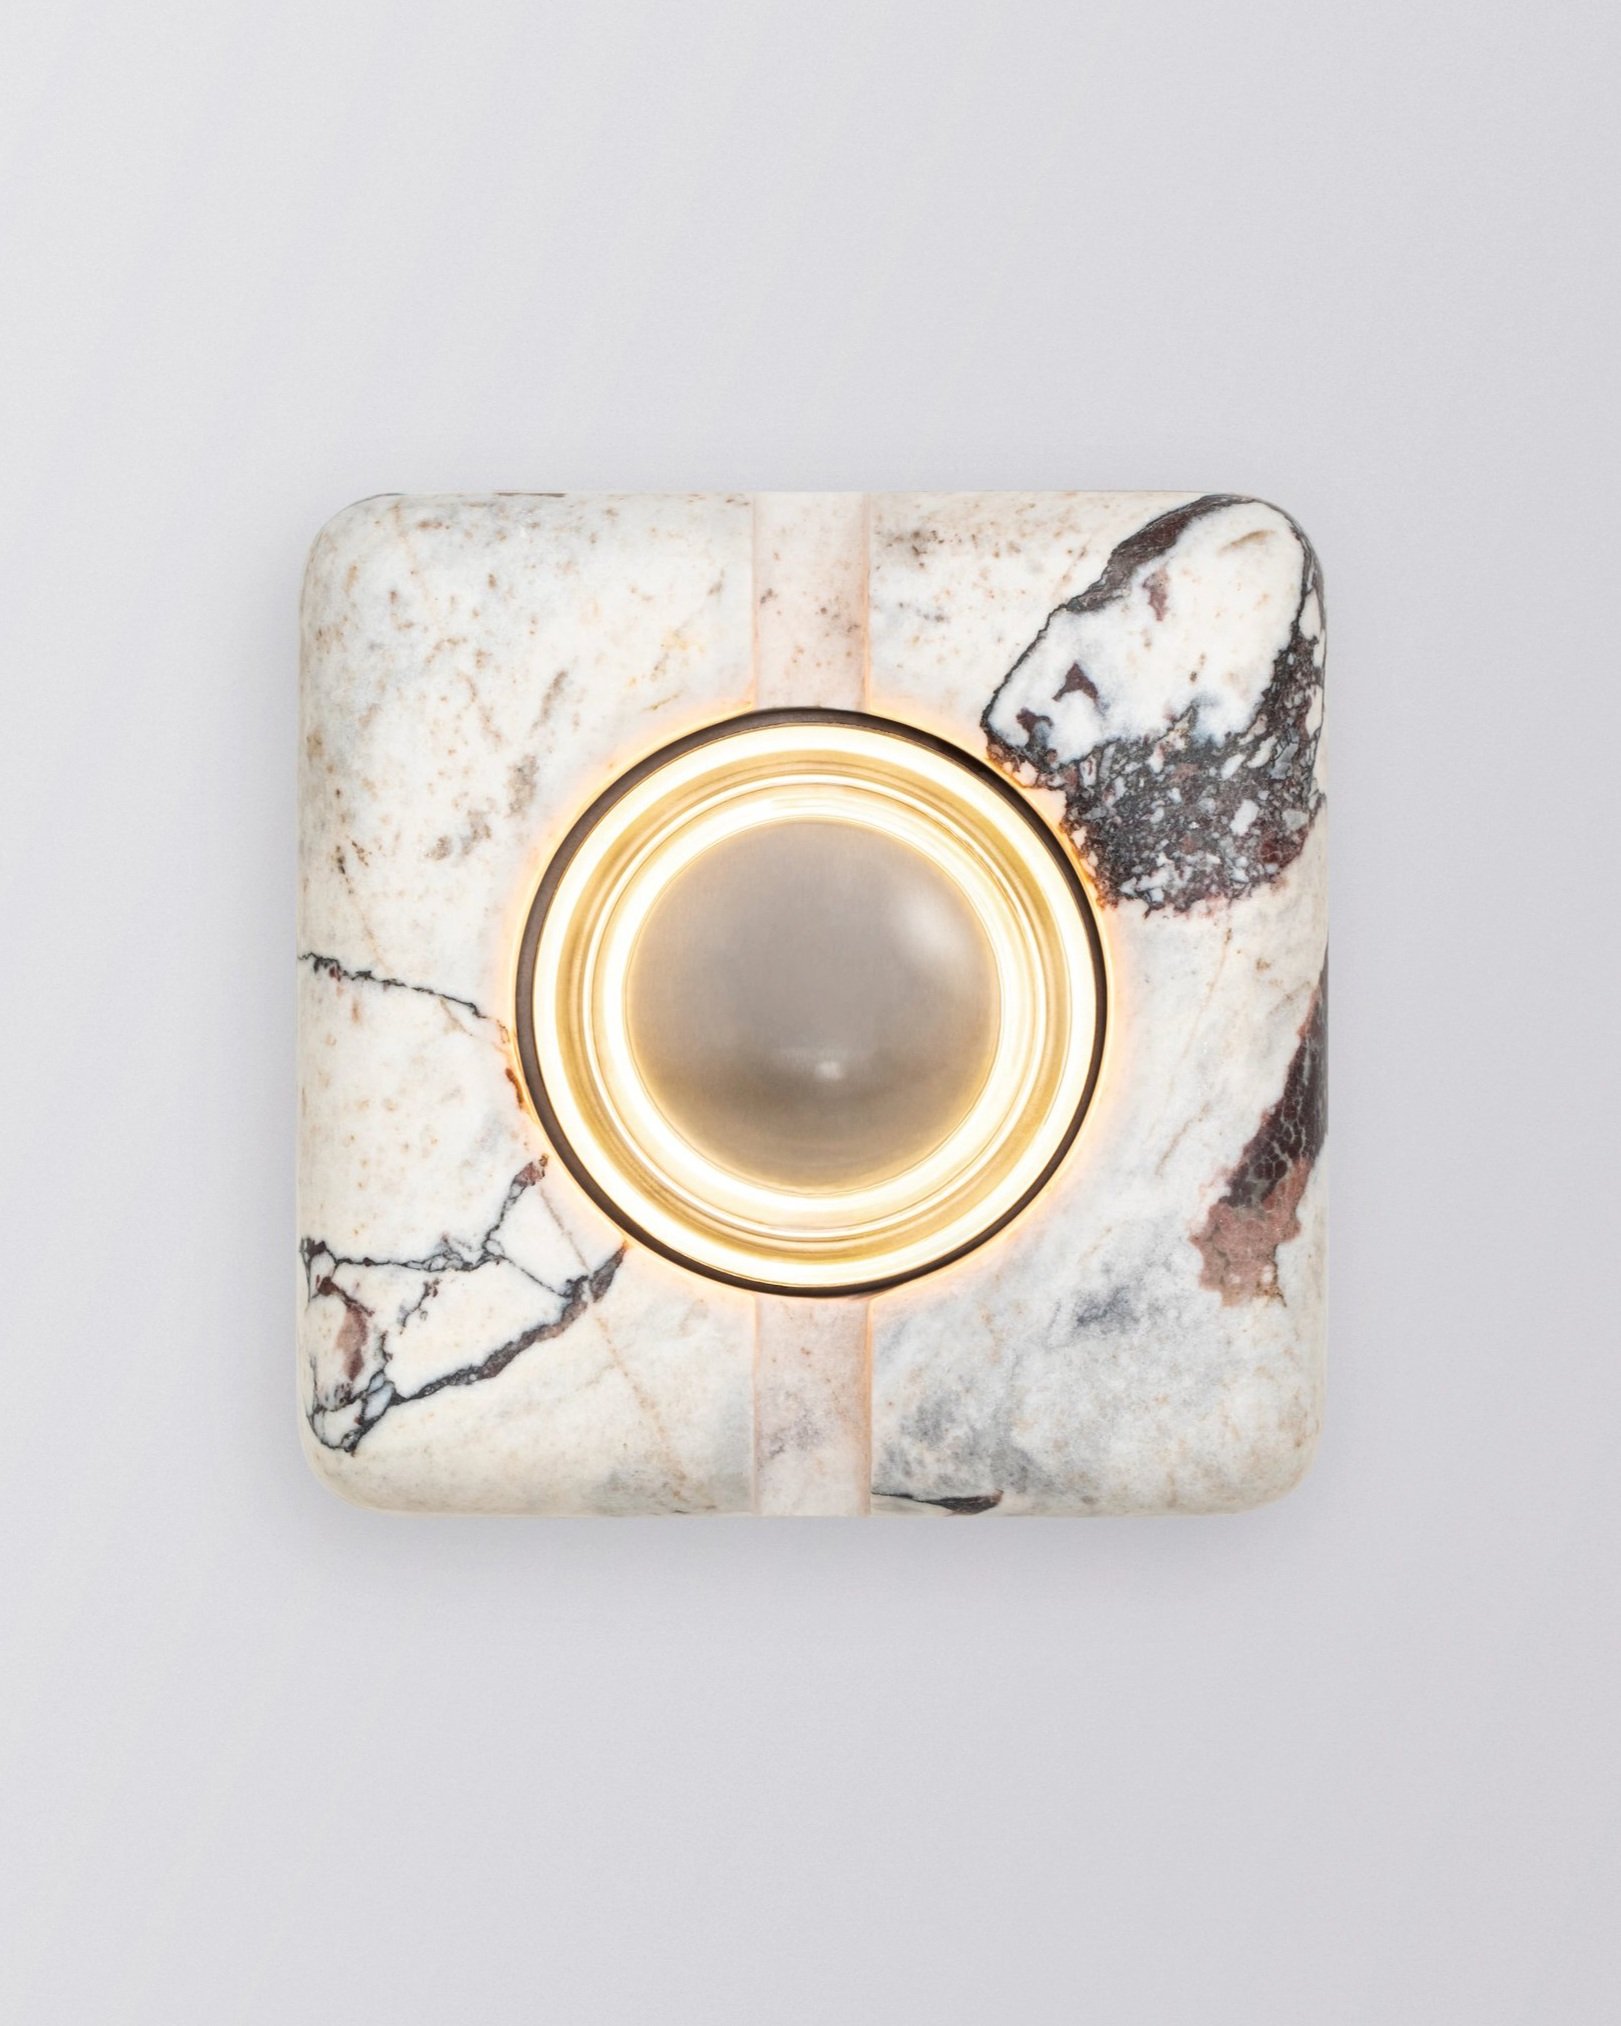 ULAH WALL LIGHT IN VIOLA WITH CLEAR GLASS HALF-ORB